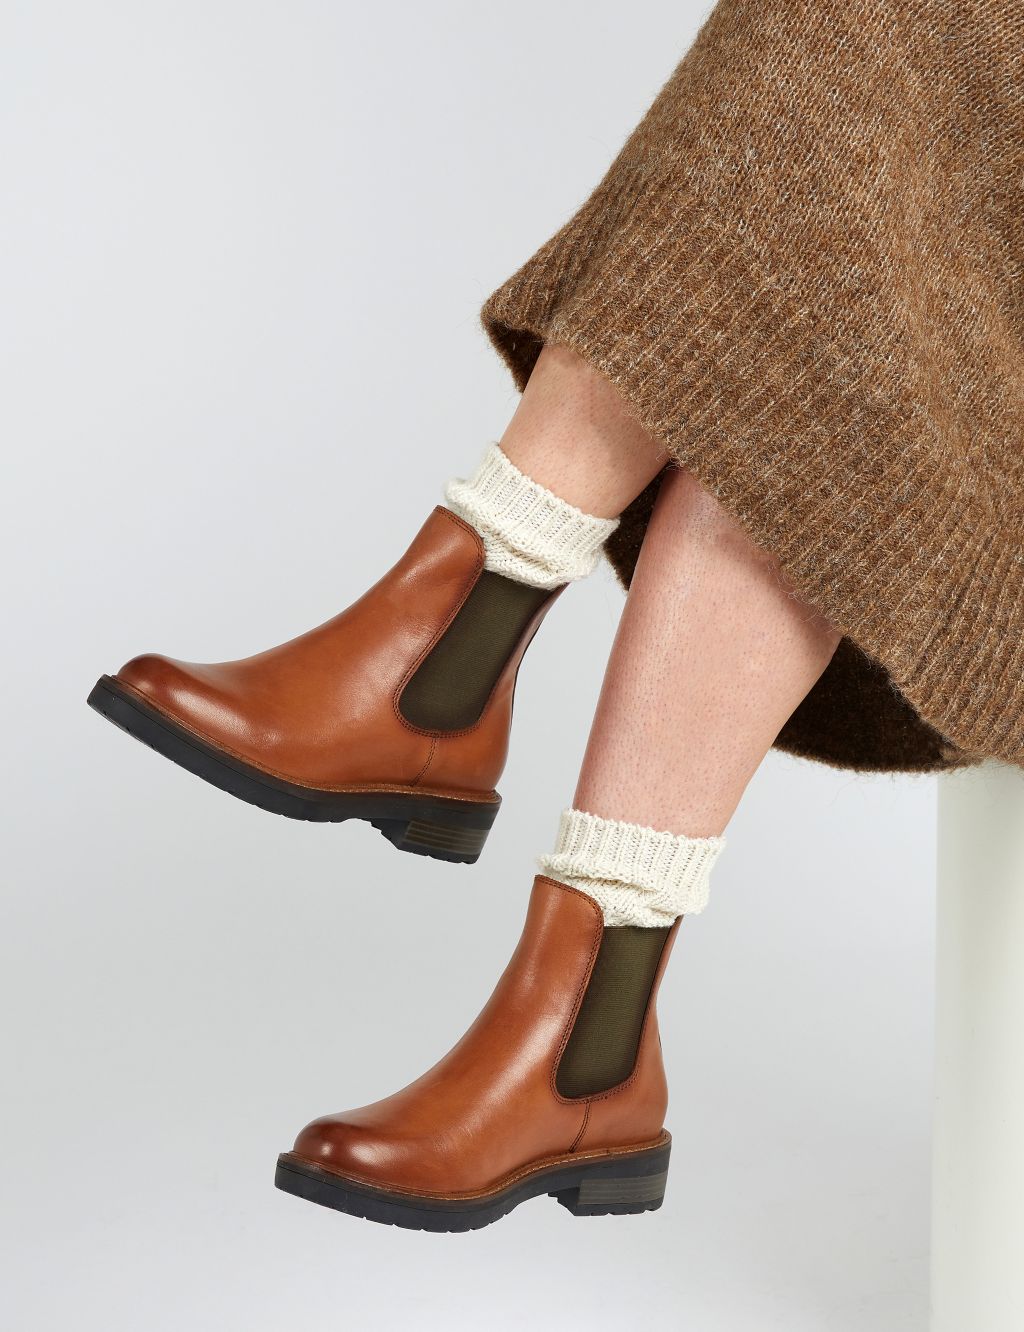 Leather Chelsea Block Heel Ankle Boot image 1